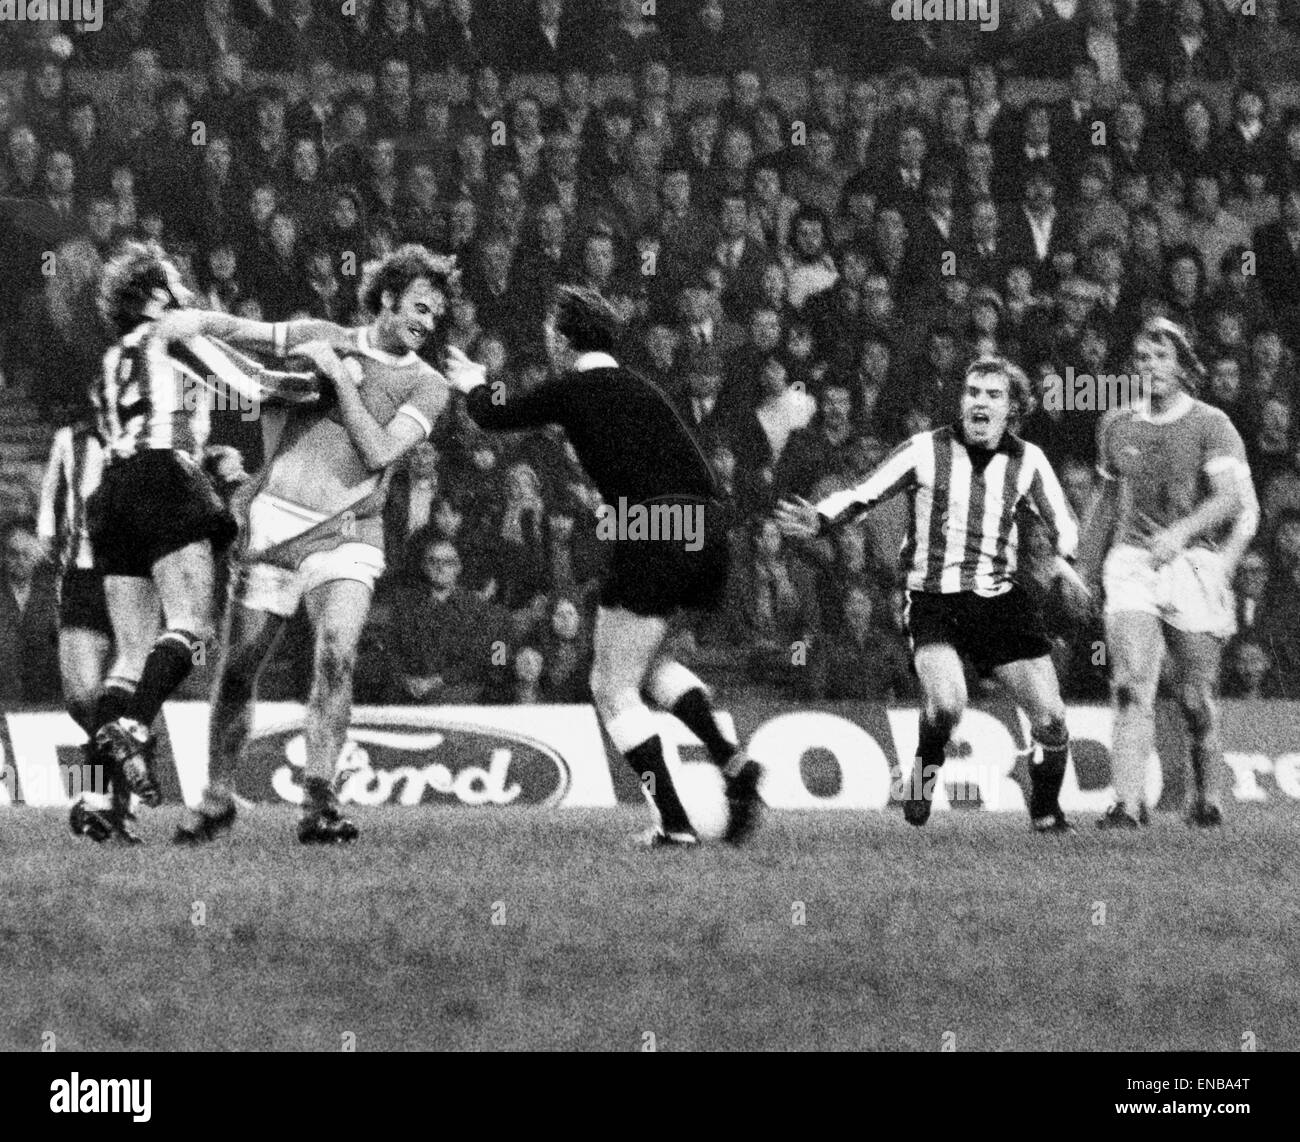 Manchester City v Stoke City league match at Maine Road, Saturday 9th November 1974. Rodney Marsh clashes with Terry Conroy under watchful eye of referee, also pictured, John Mahoney & Alan Oakes (right). It resulted in Conroy being booked. Final score: M Stock Photo